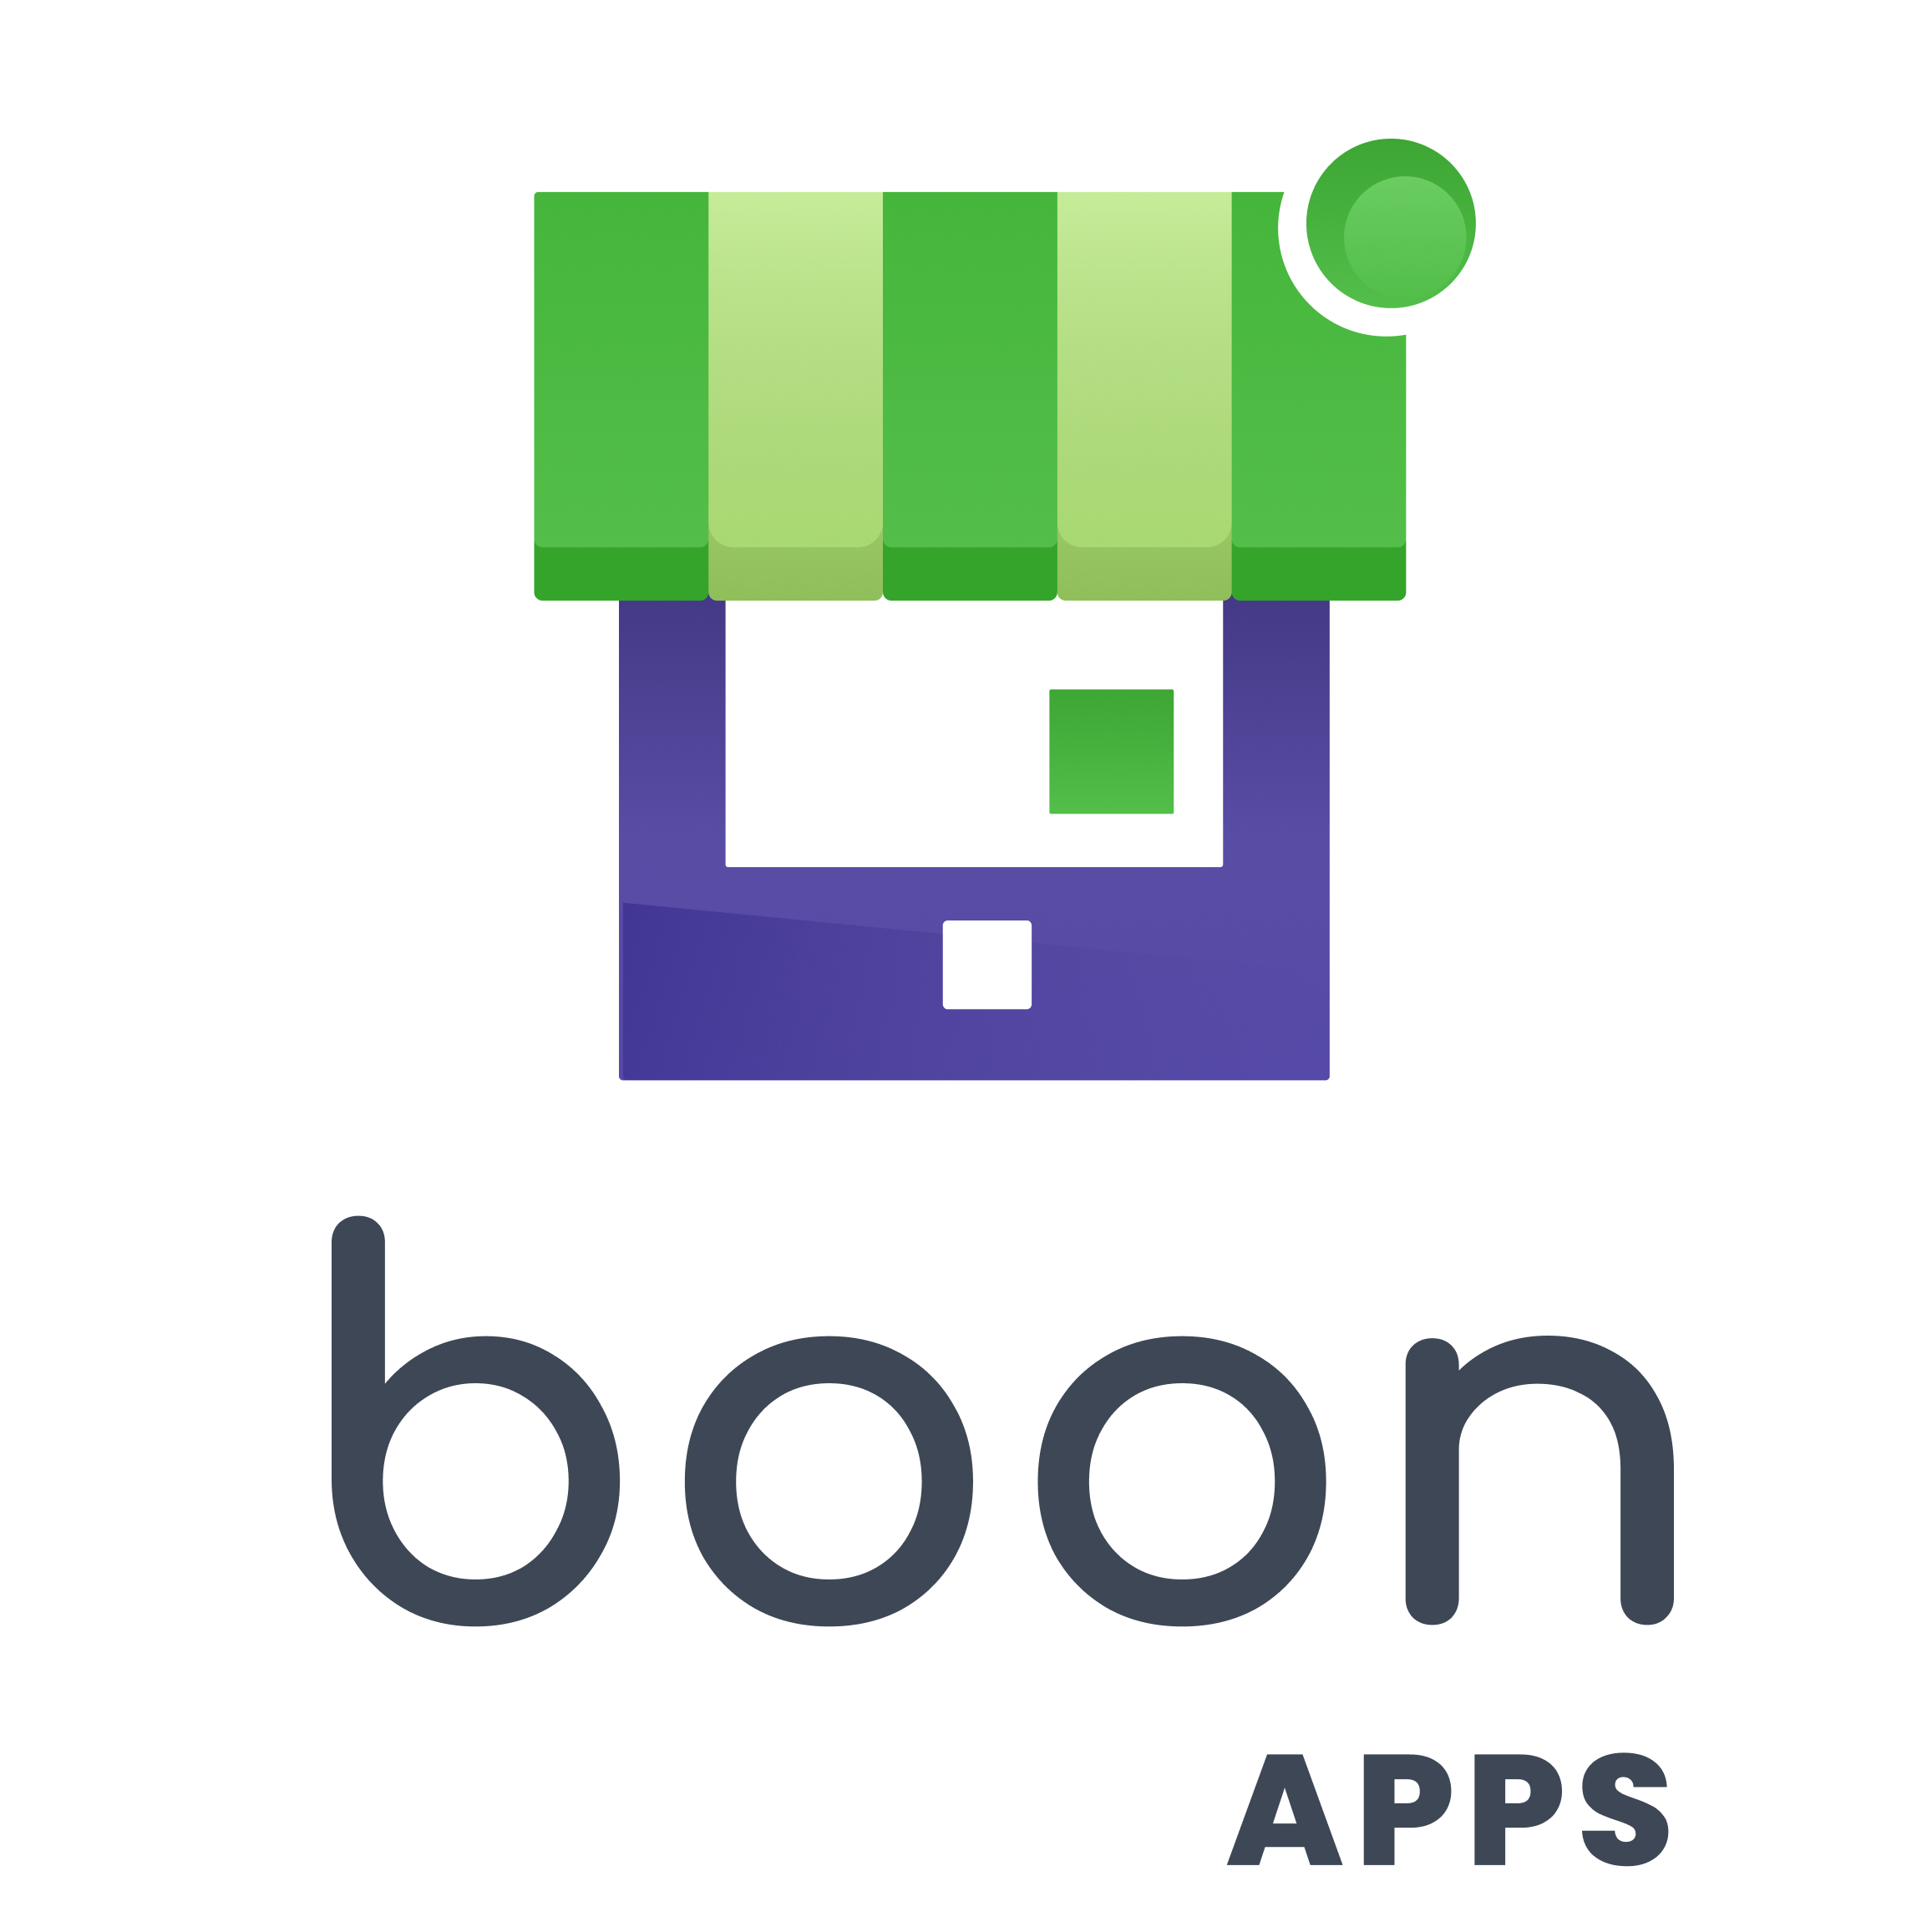 Boon Apps